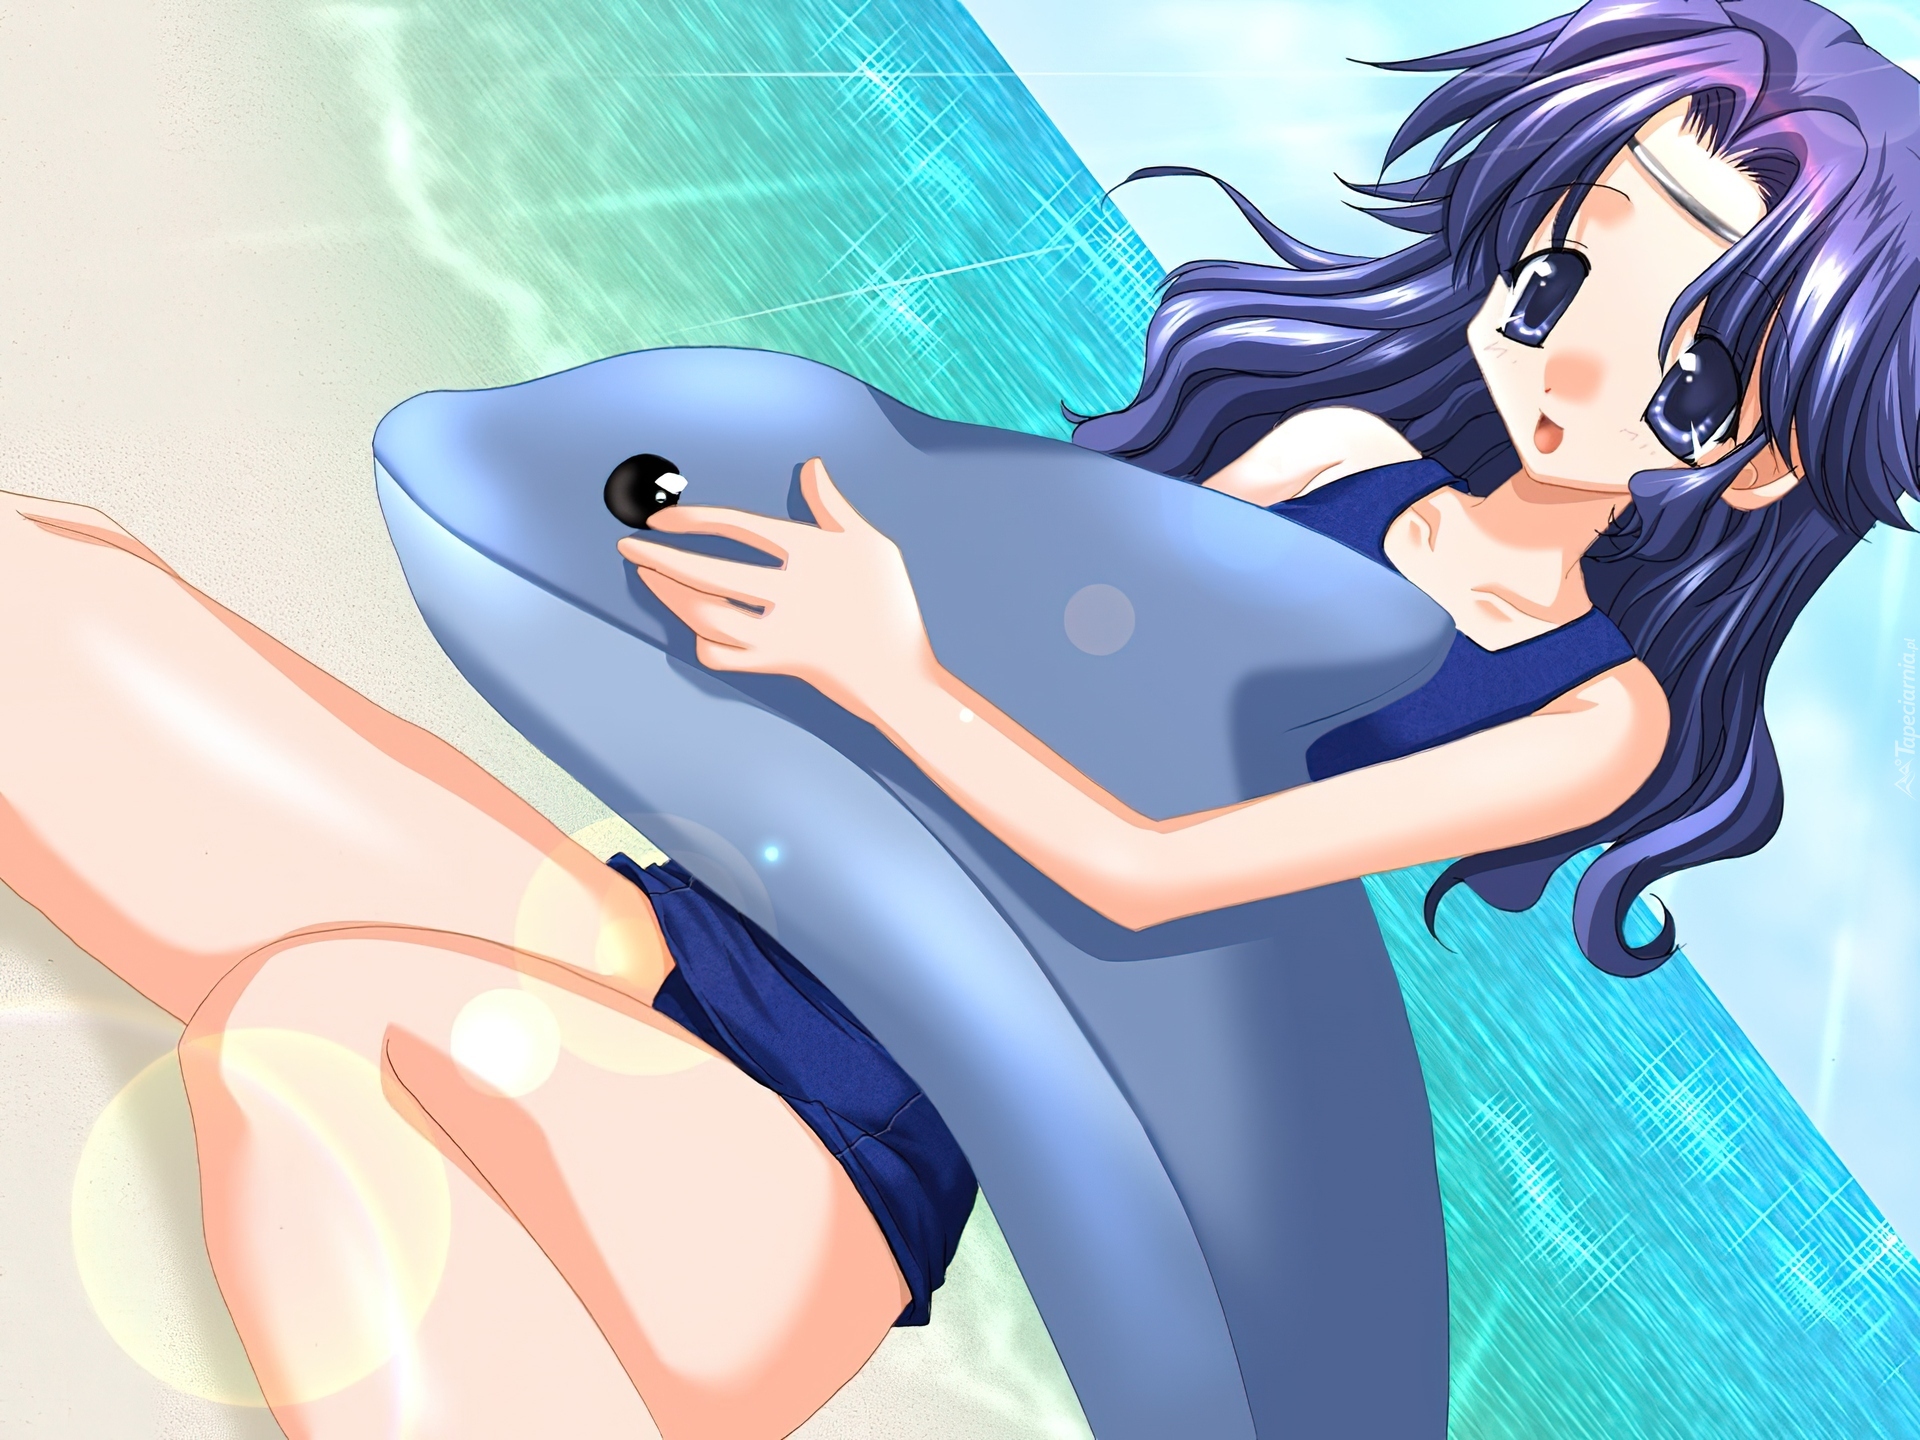 Dive deep into dolphin hentai - the ultimate erotic delight!